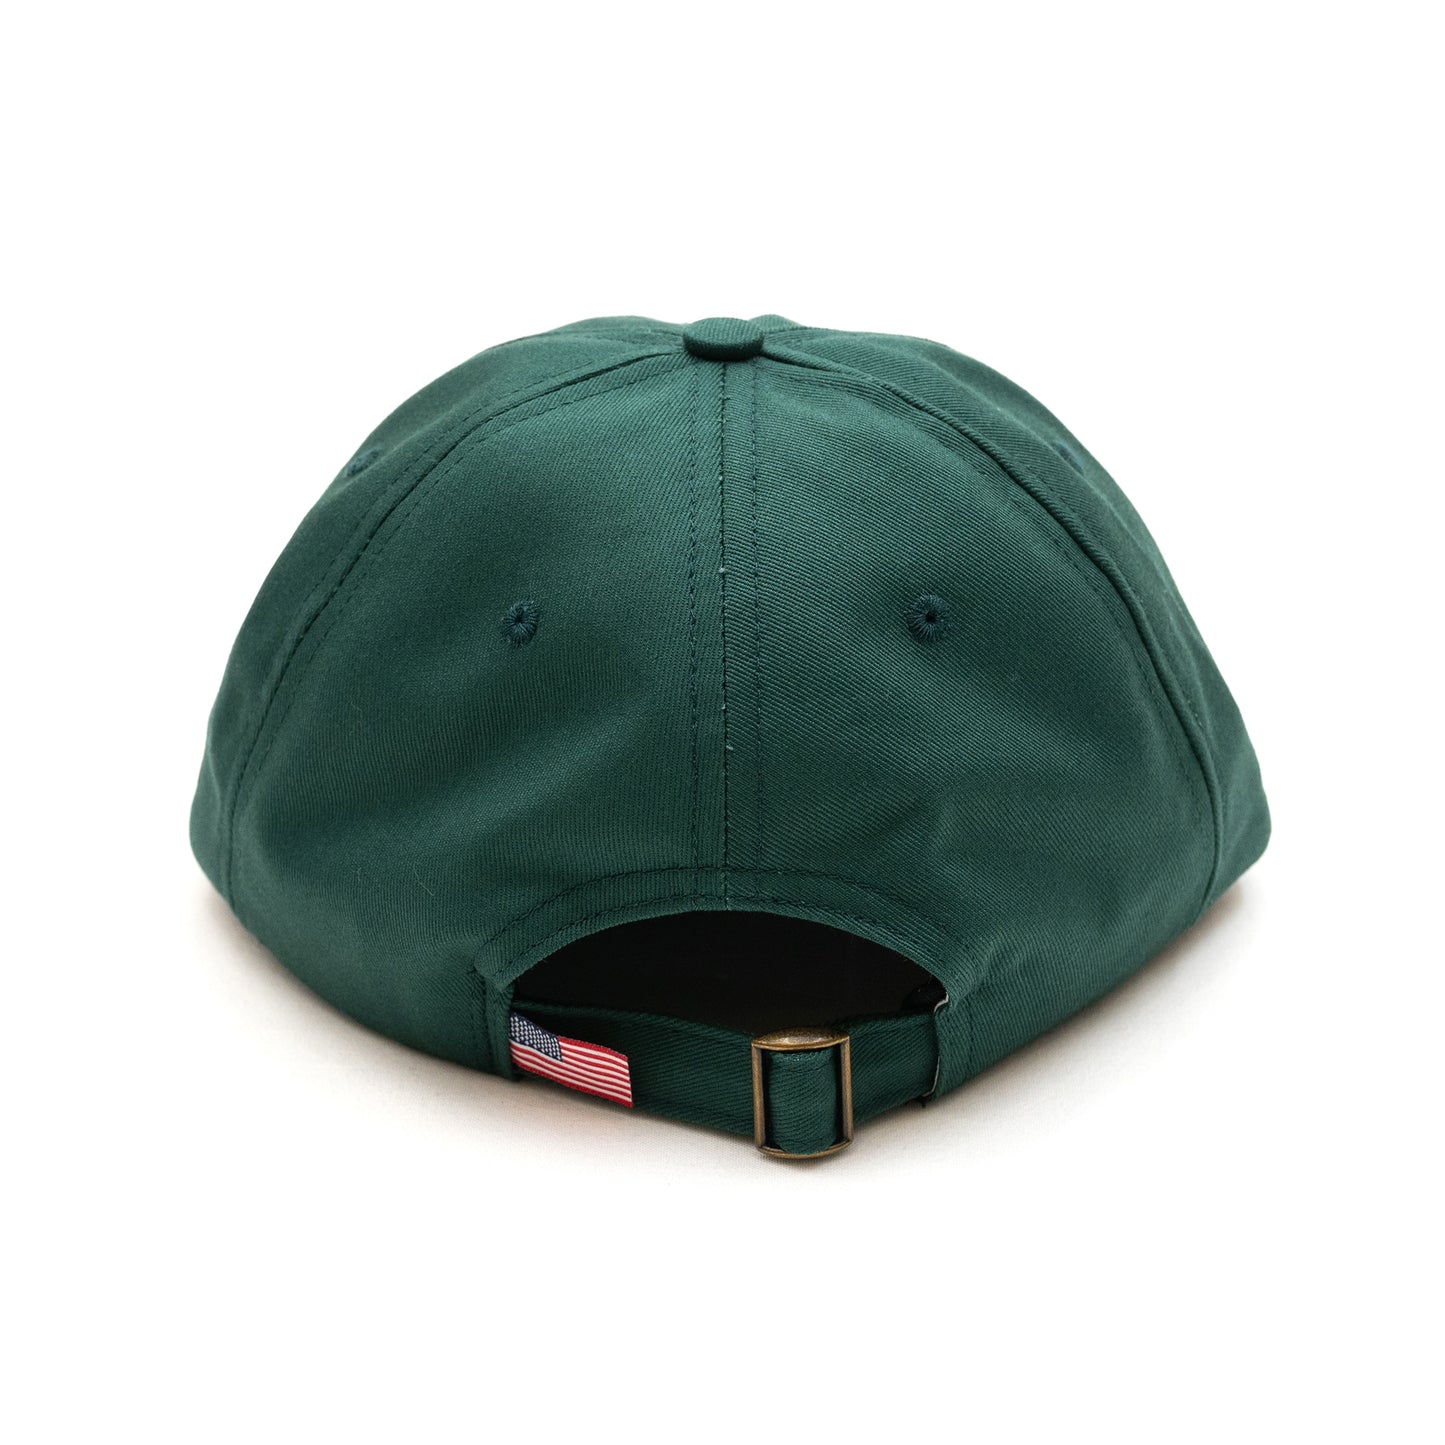 COOPERS TOWN BALLCAP SOLID WASHED CAP - GREEN